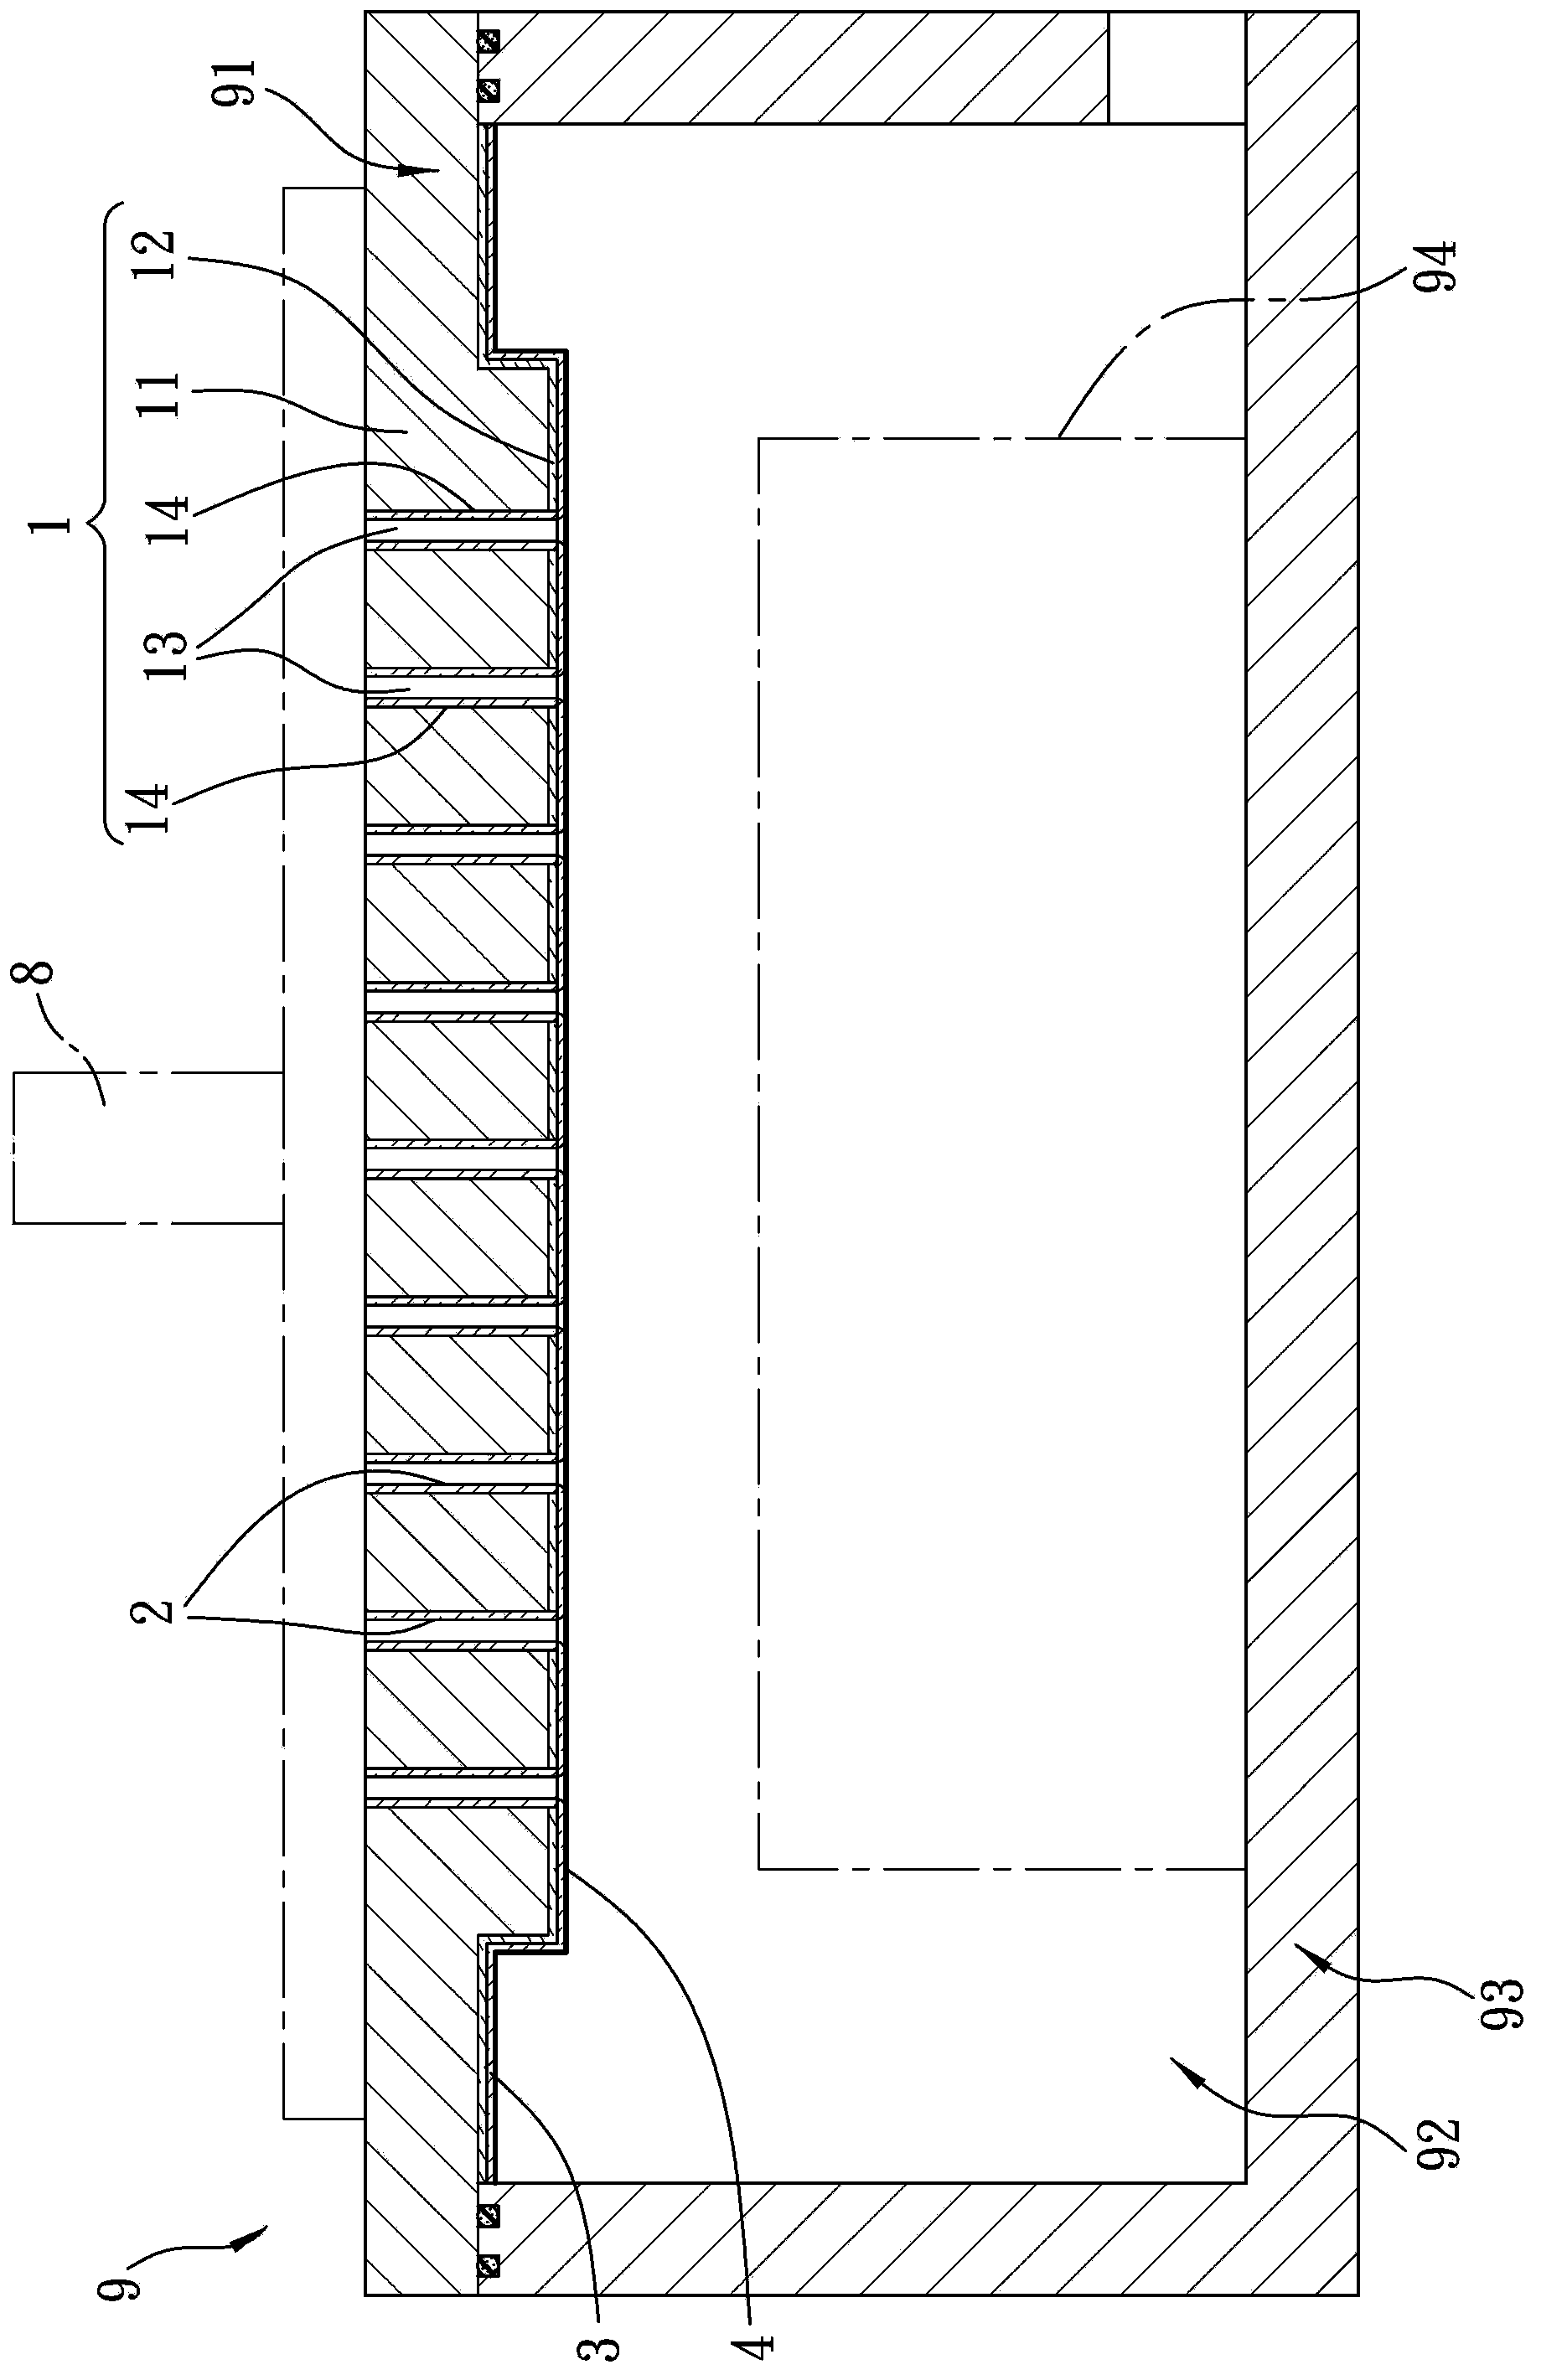 Top electrode of reaction tank device for etching equipment